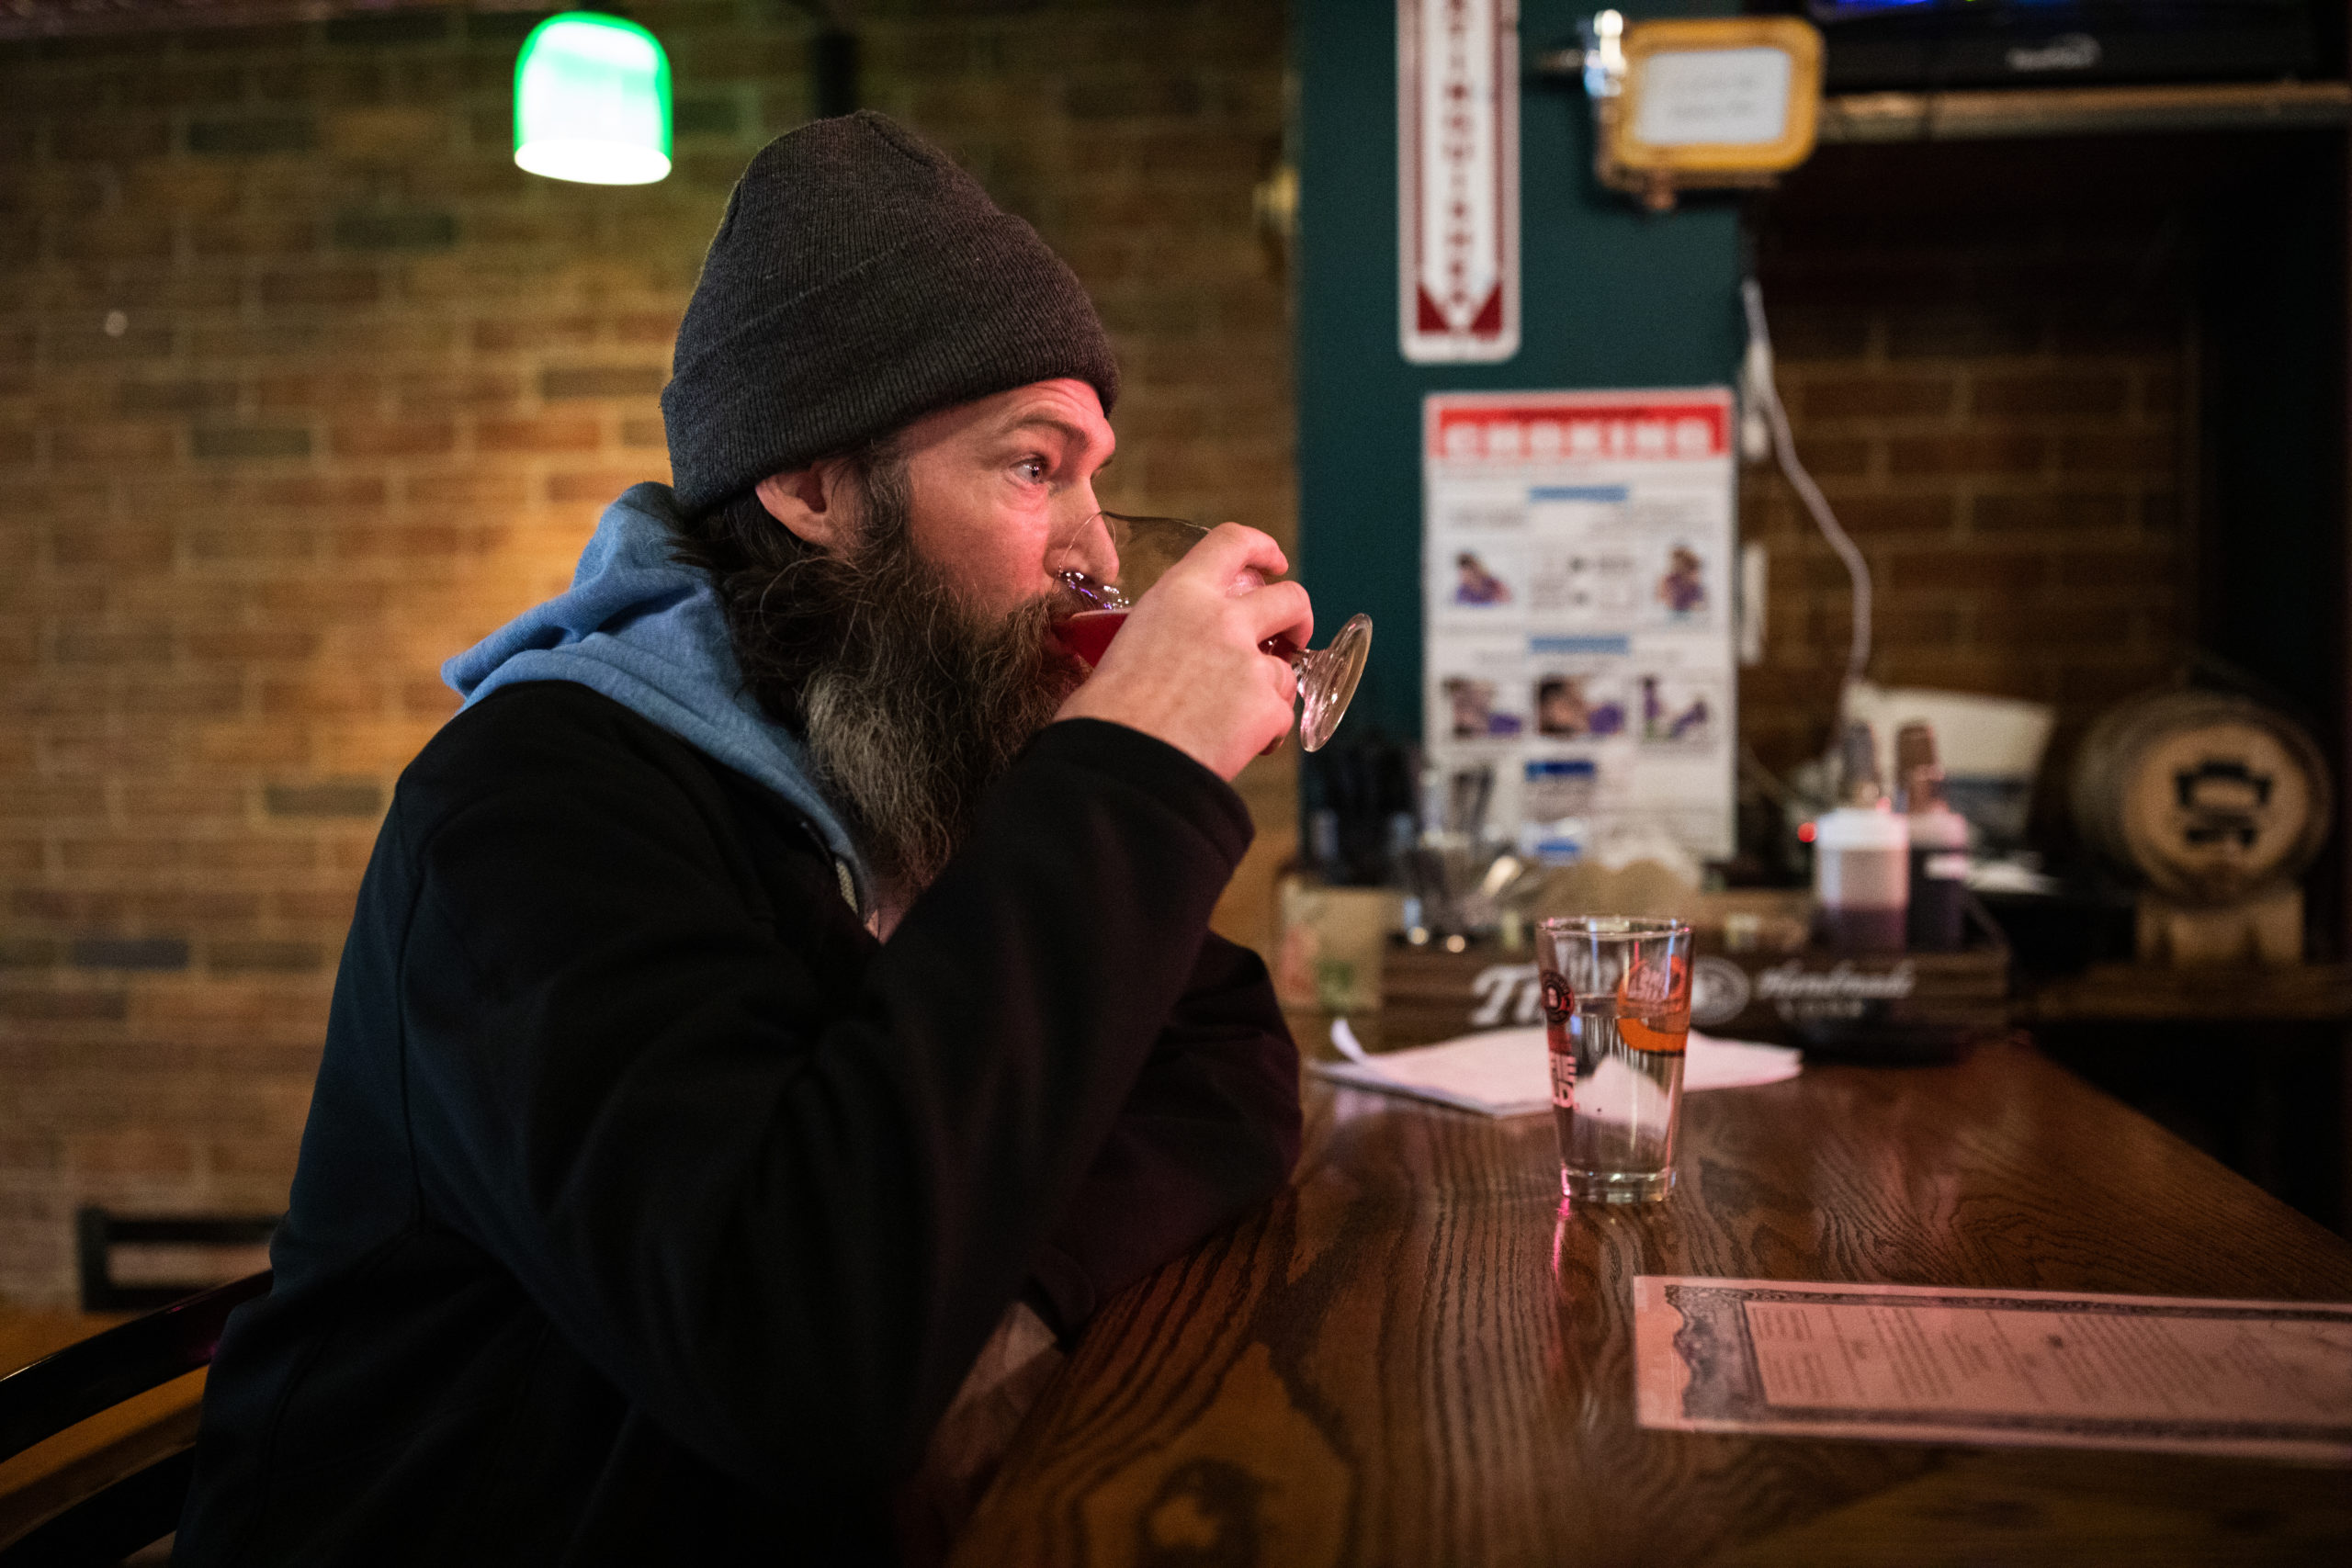 Aaron Curran drinks at the bar of Someday in Boerum Hill on March 16, 2020. Gov. Andrew Cuomo previously ordered all bars and restaurants would have to close by 8 p.m. on the 16th. They could continue with takeout and delivery. Photo: Paul Frangipane/Brooklyn Eagle